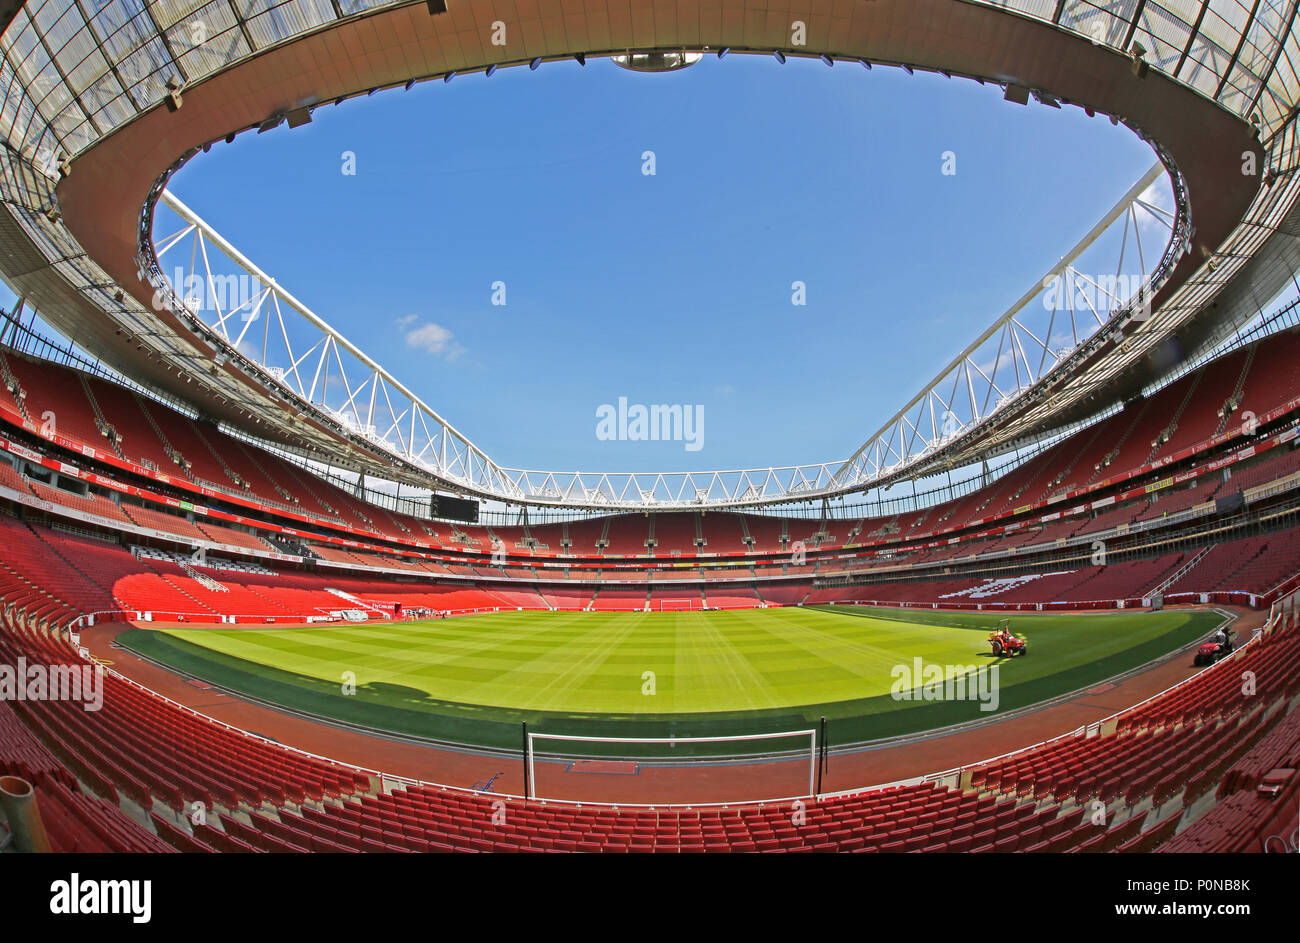 Fish-eye picture of the pitch at London's Emirates Stadium, home to Premier League football team Arsenal. Empty. Shows tractor cutting the grass. Stock Photo